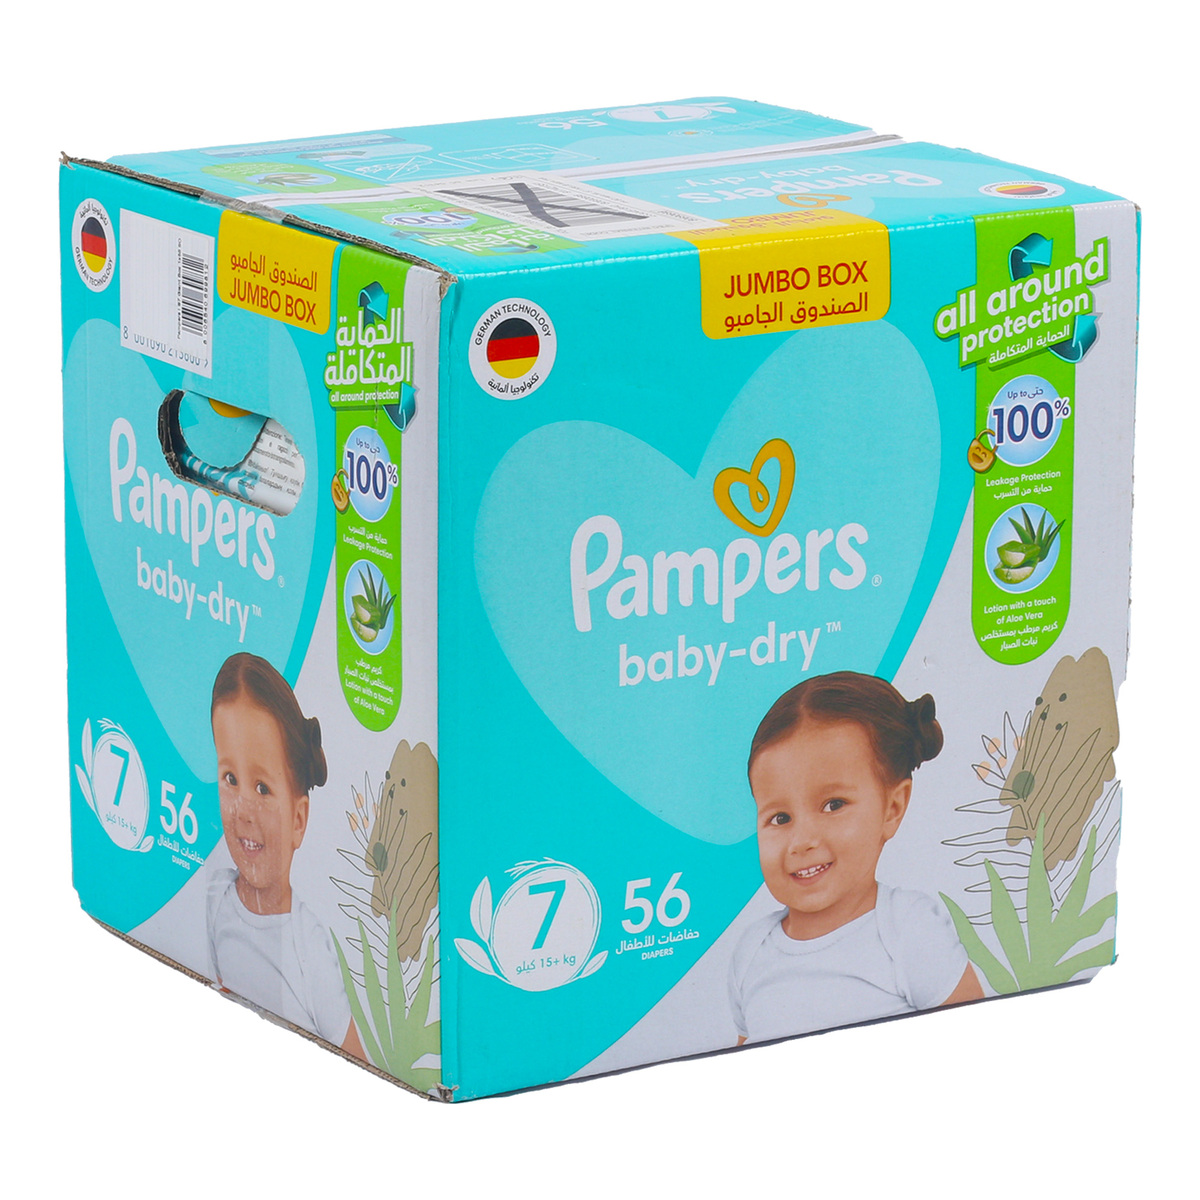 Pampers Diaper Baby Dry Size 7 15+ kg Value Pack 56 pcs